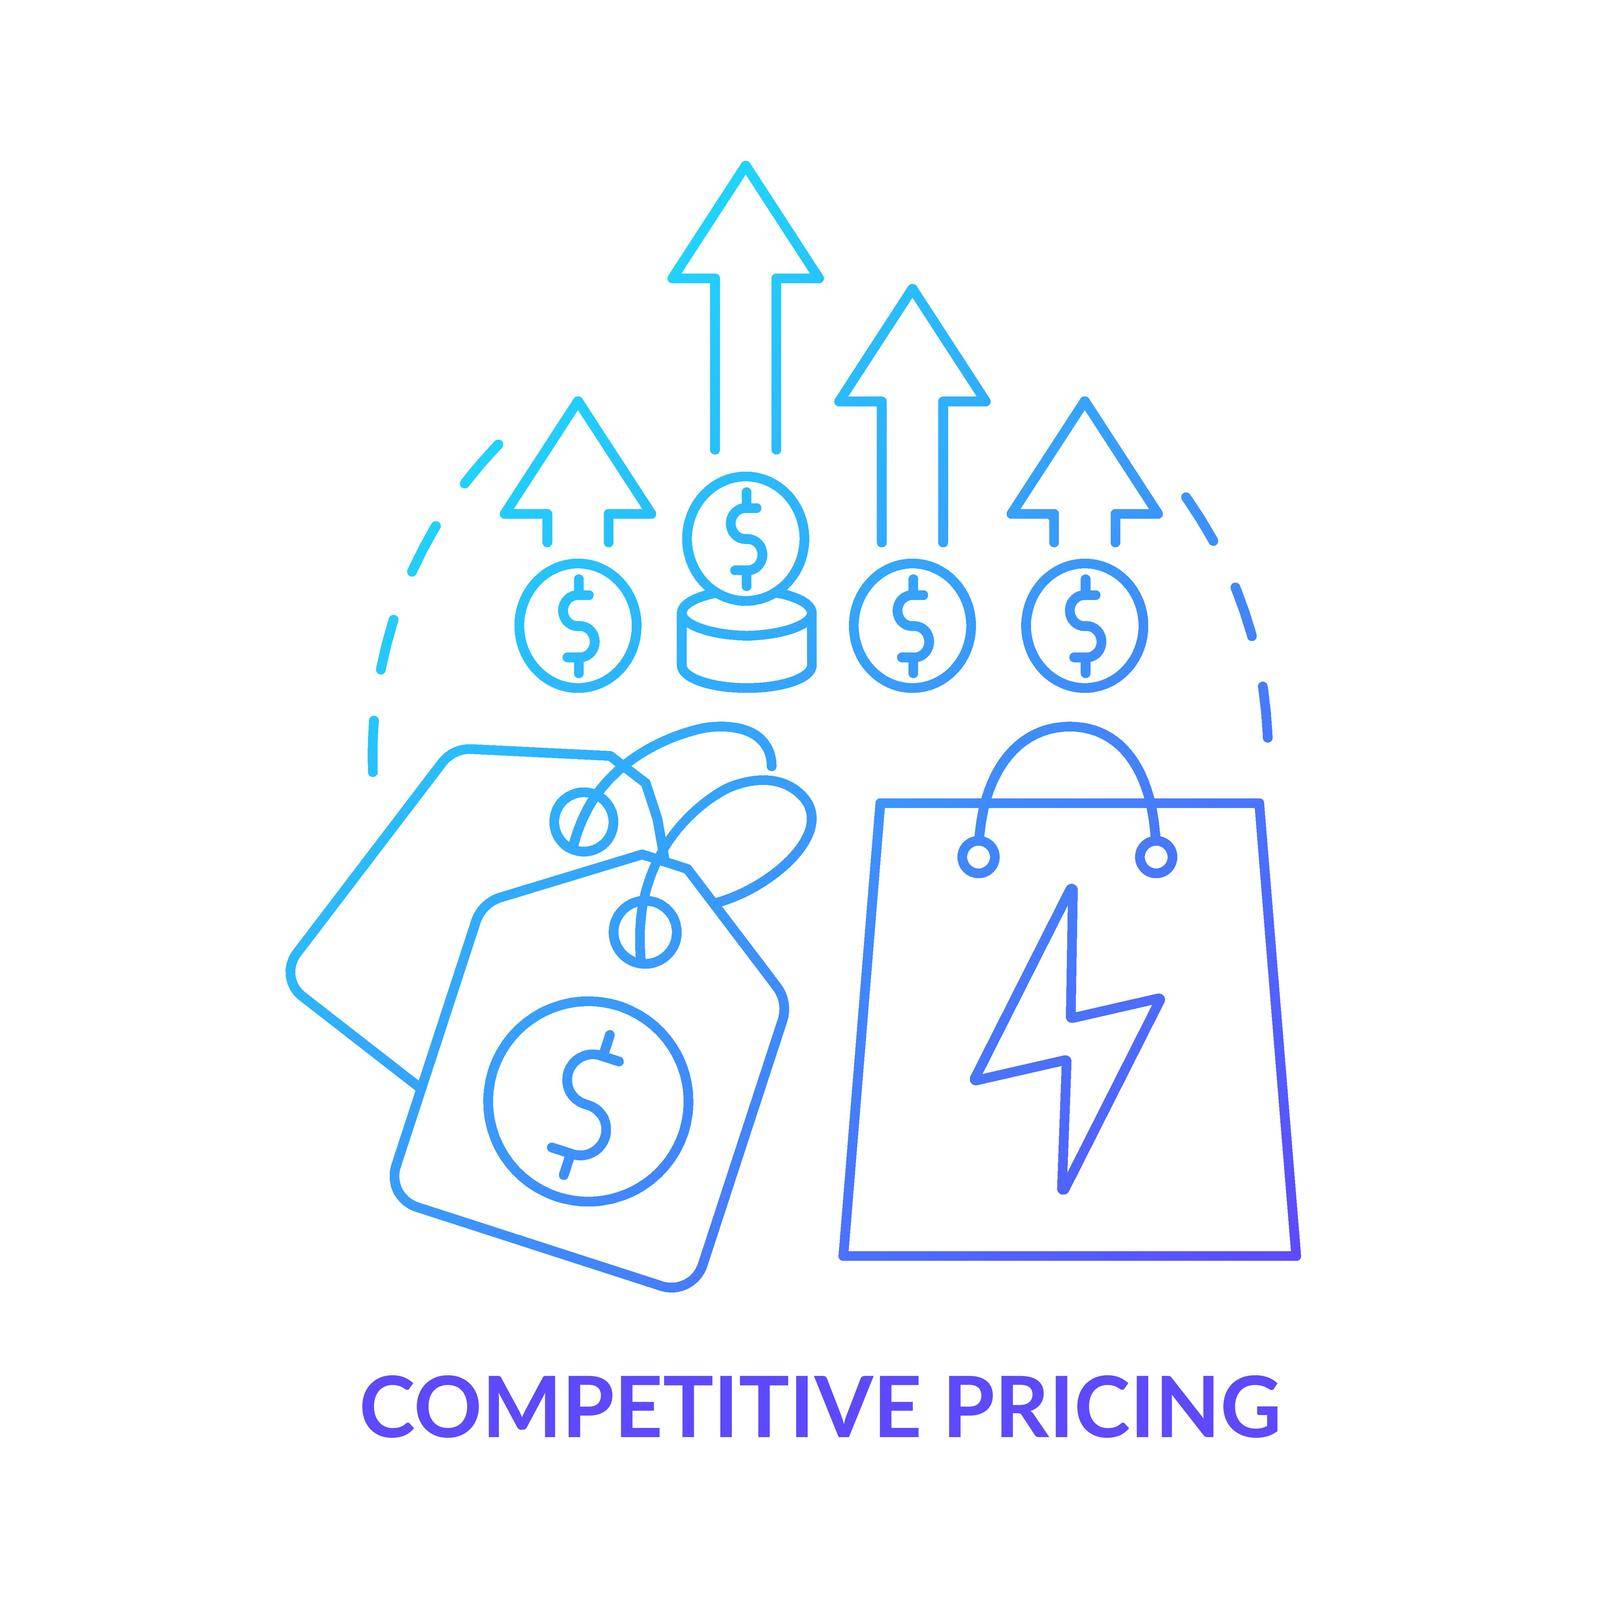 Competitive pricing blue gradient concept icon by bsd studio